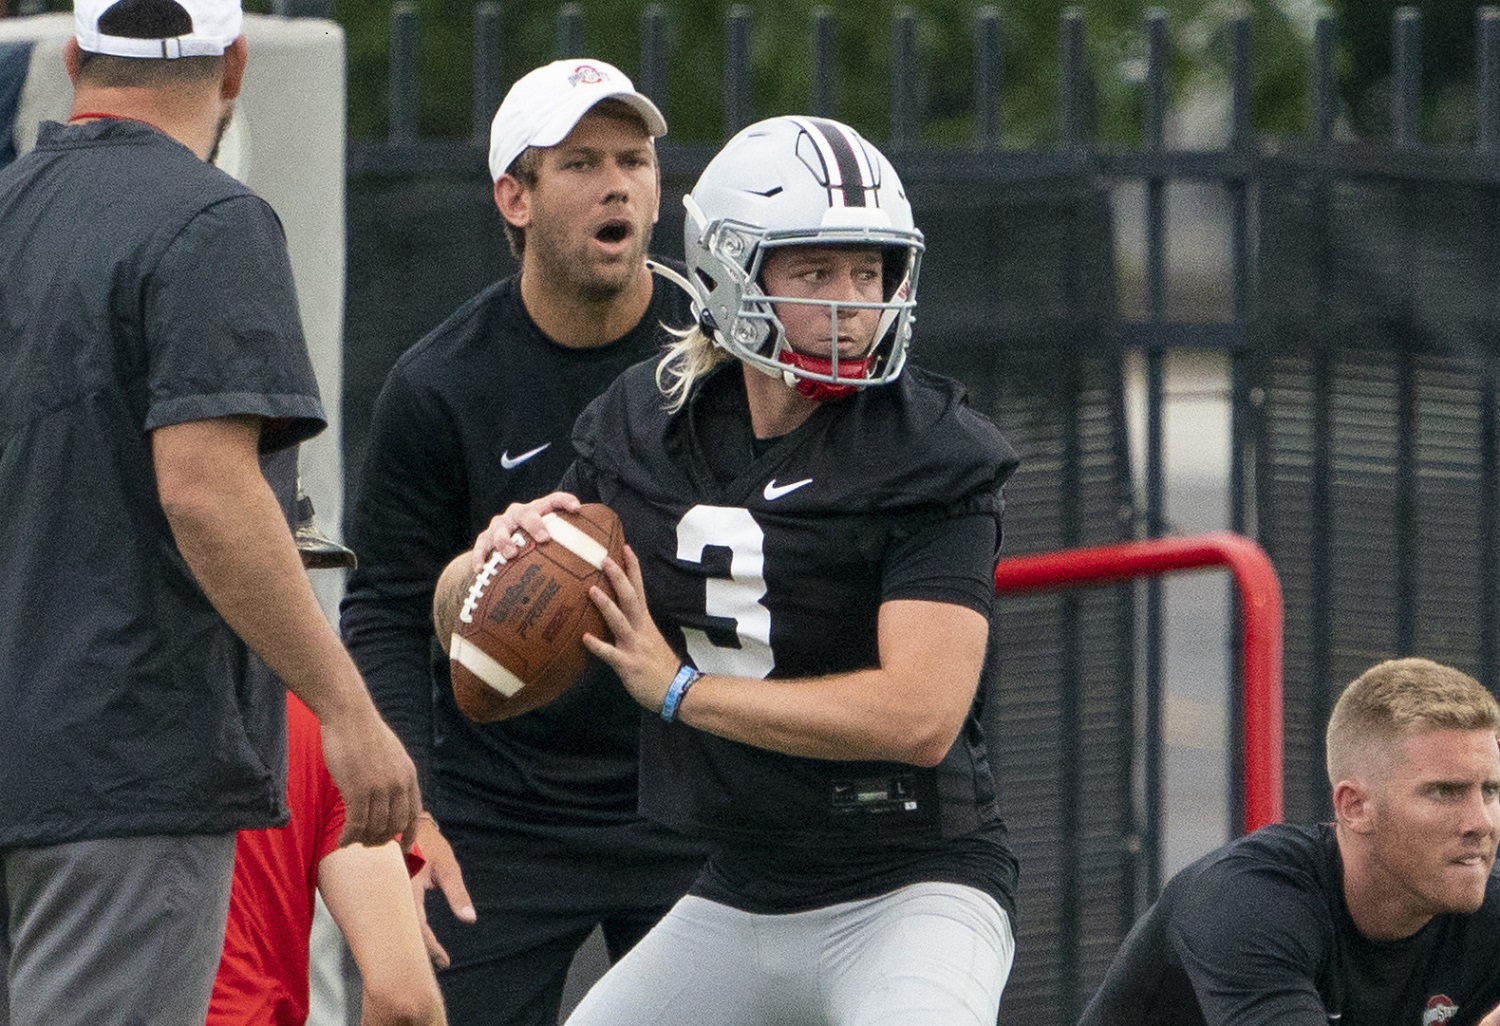 Ohio State freshman Quinn Ewers during fall camp at the Woody Hayes Athletic Center in Columbus, Ohio on Aug. 18, 2021.